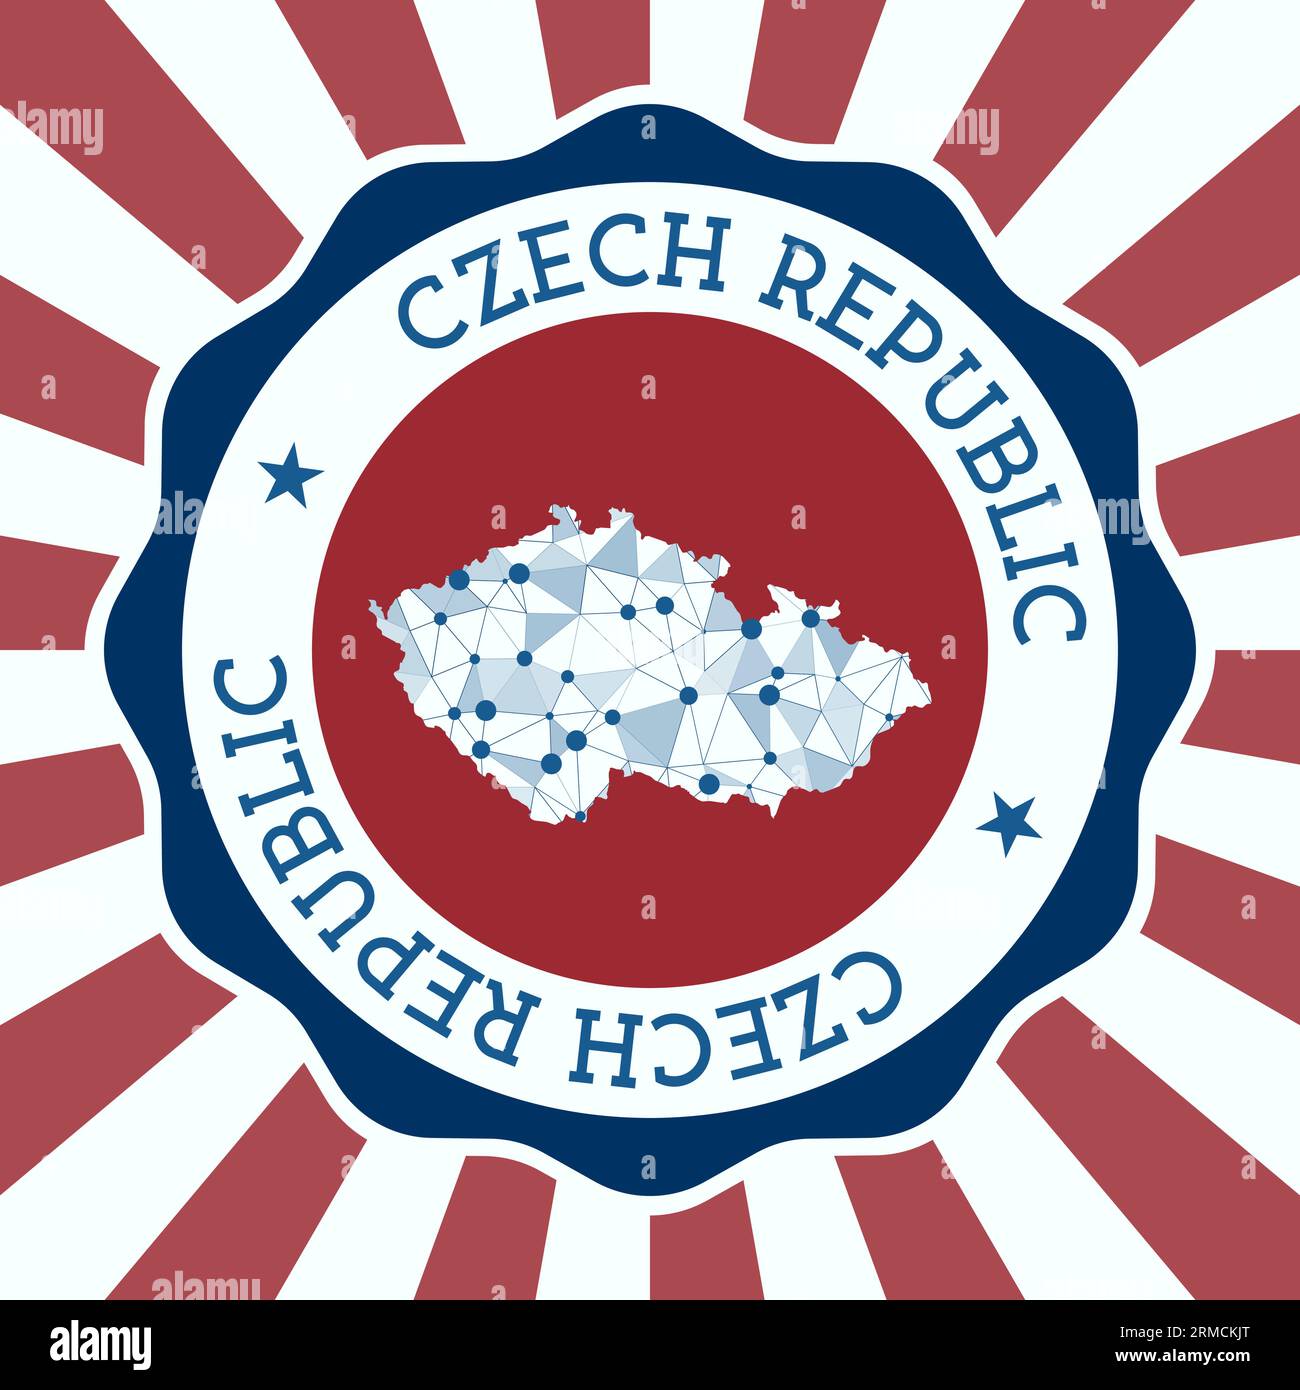 Czech Republic Badge. Round logo of country with triangular mesh map and radial rays. EPS10 Vector. Stock Vector